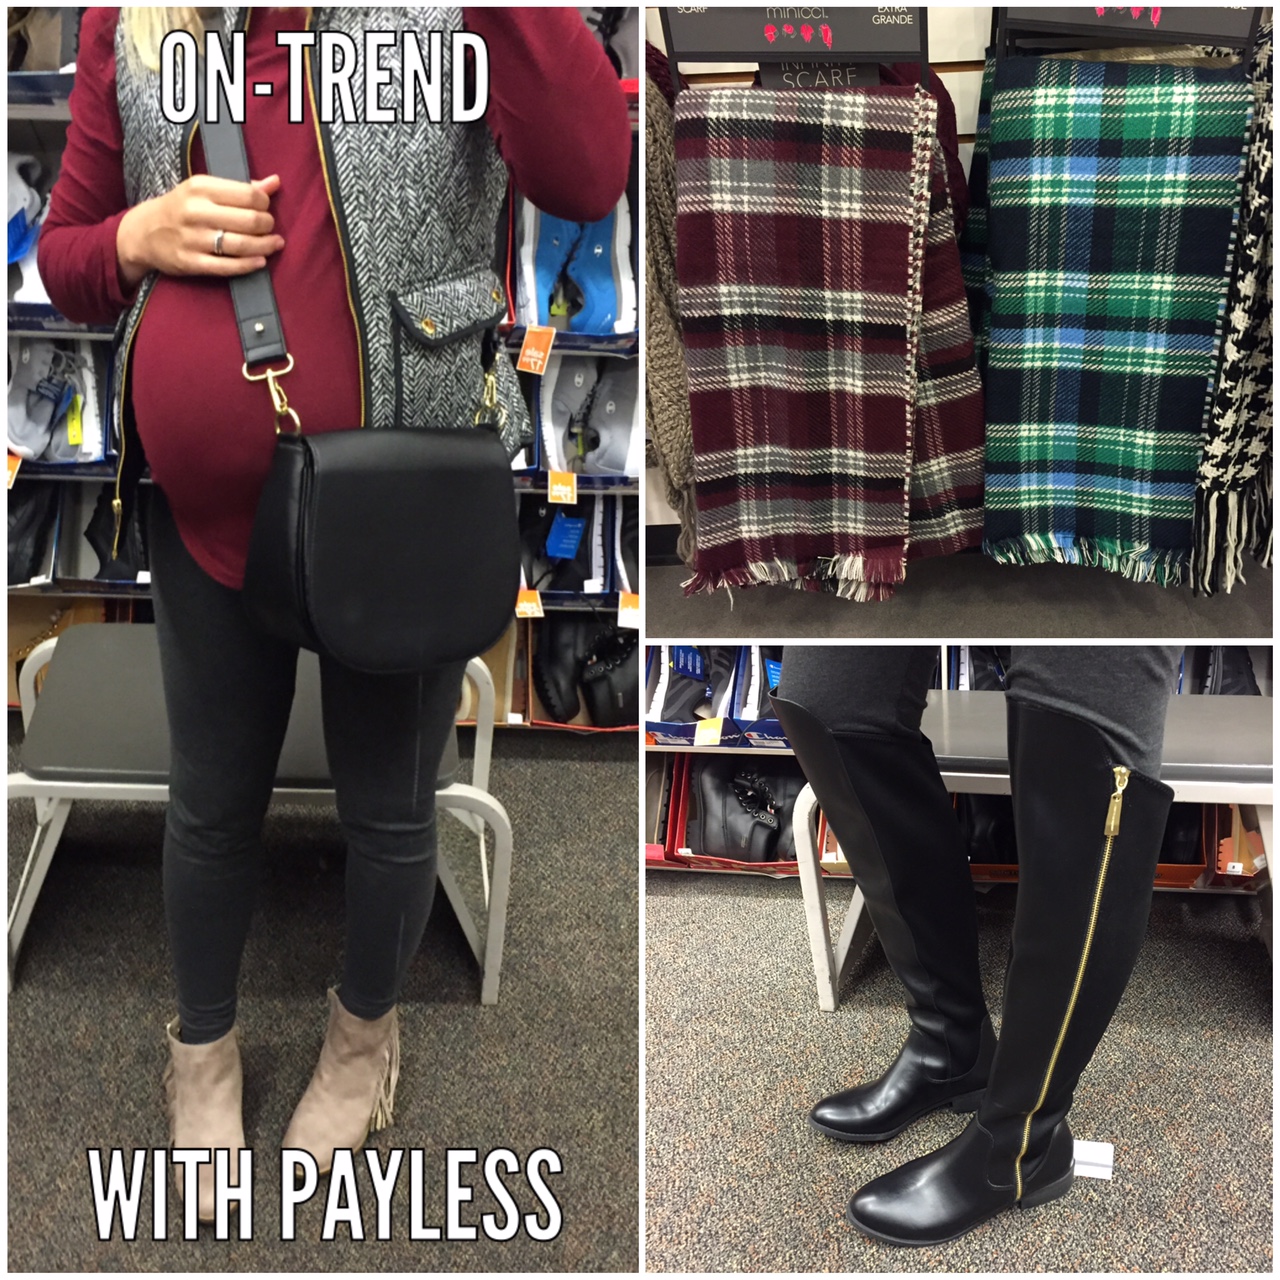 Payless shoes are on-trend for fall